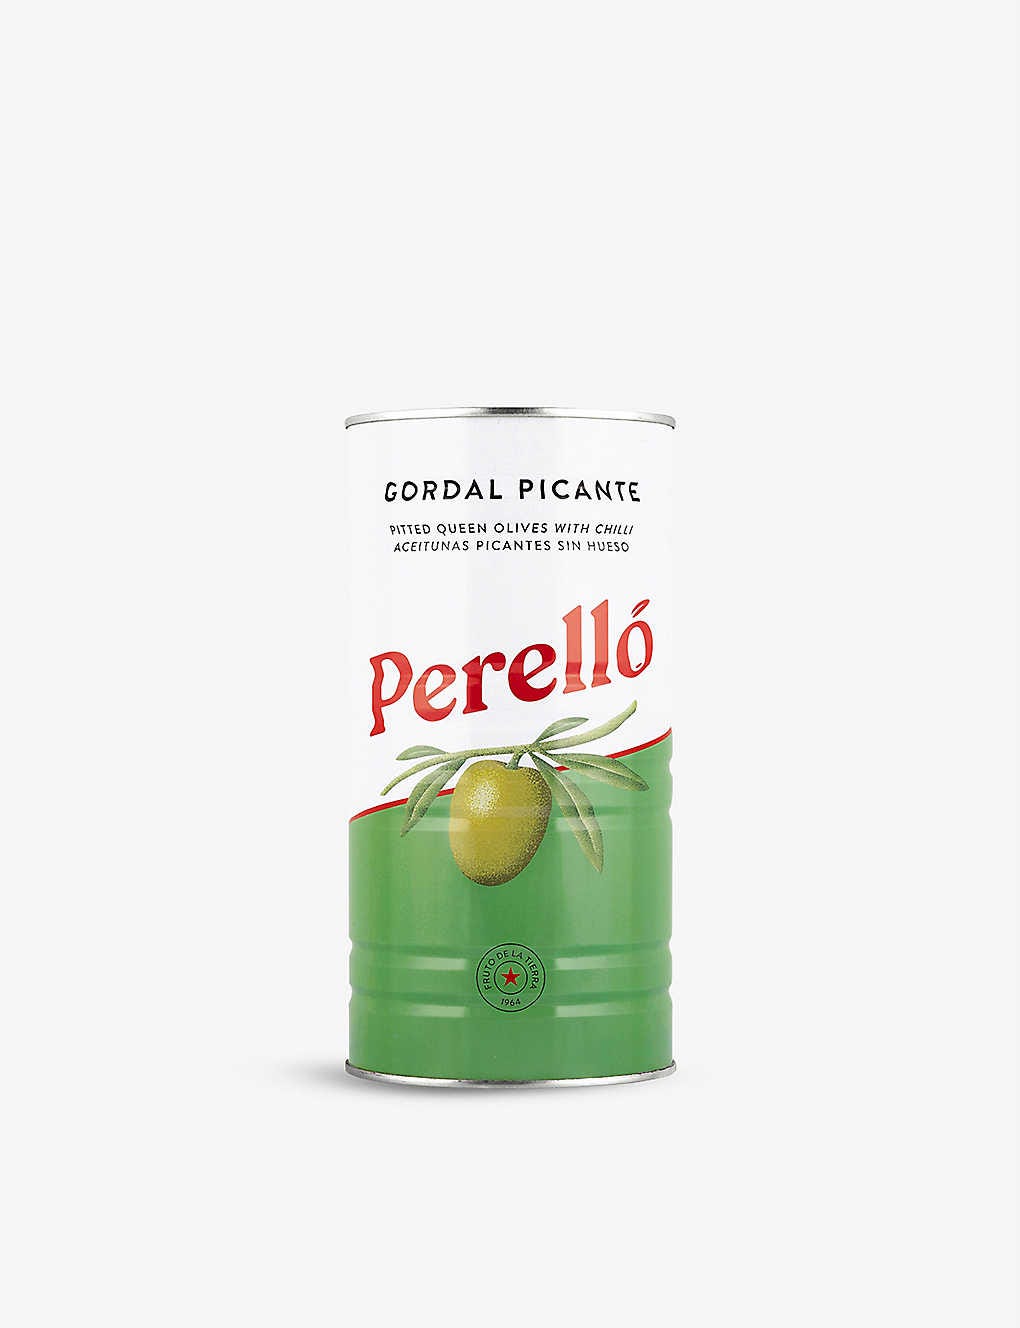 BRINDISA Perelló Gordal Picante pitted olives 1.44kg